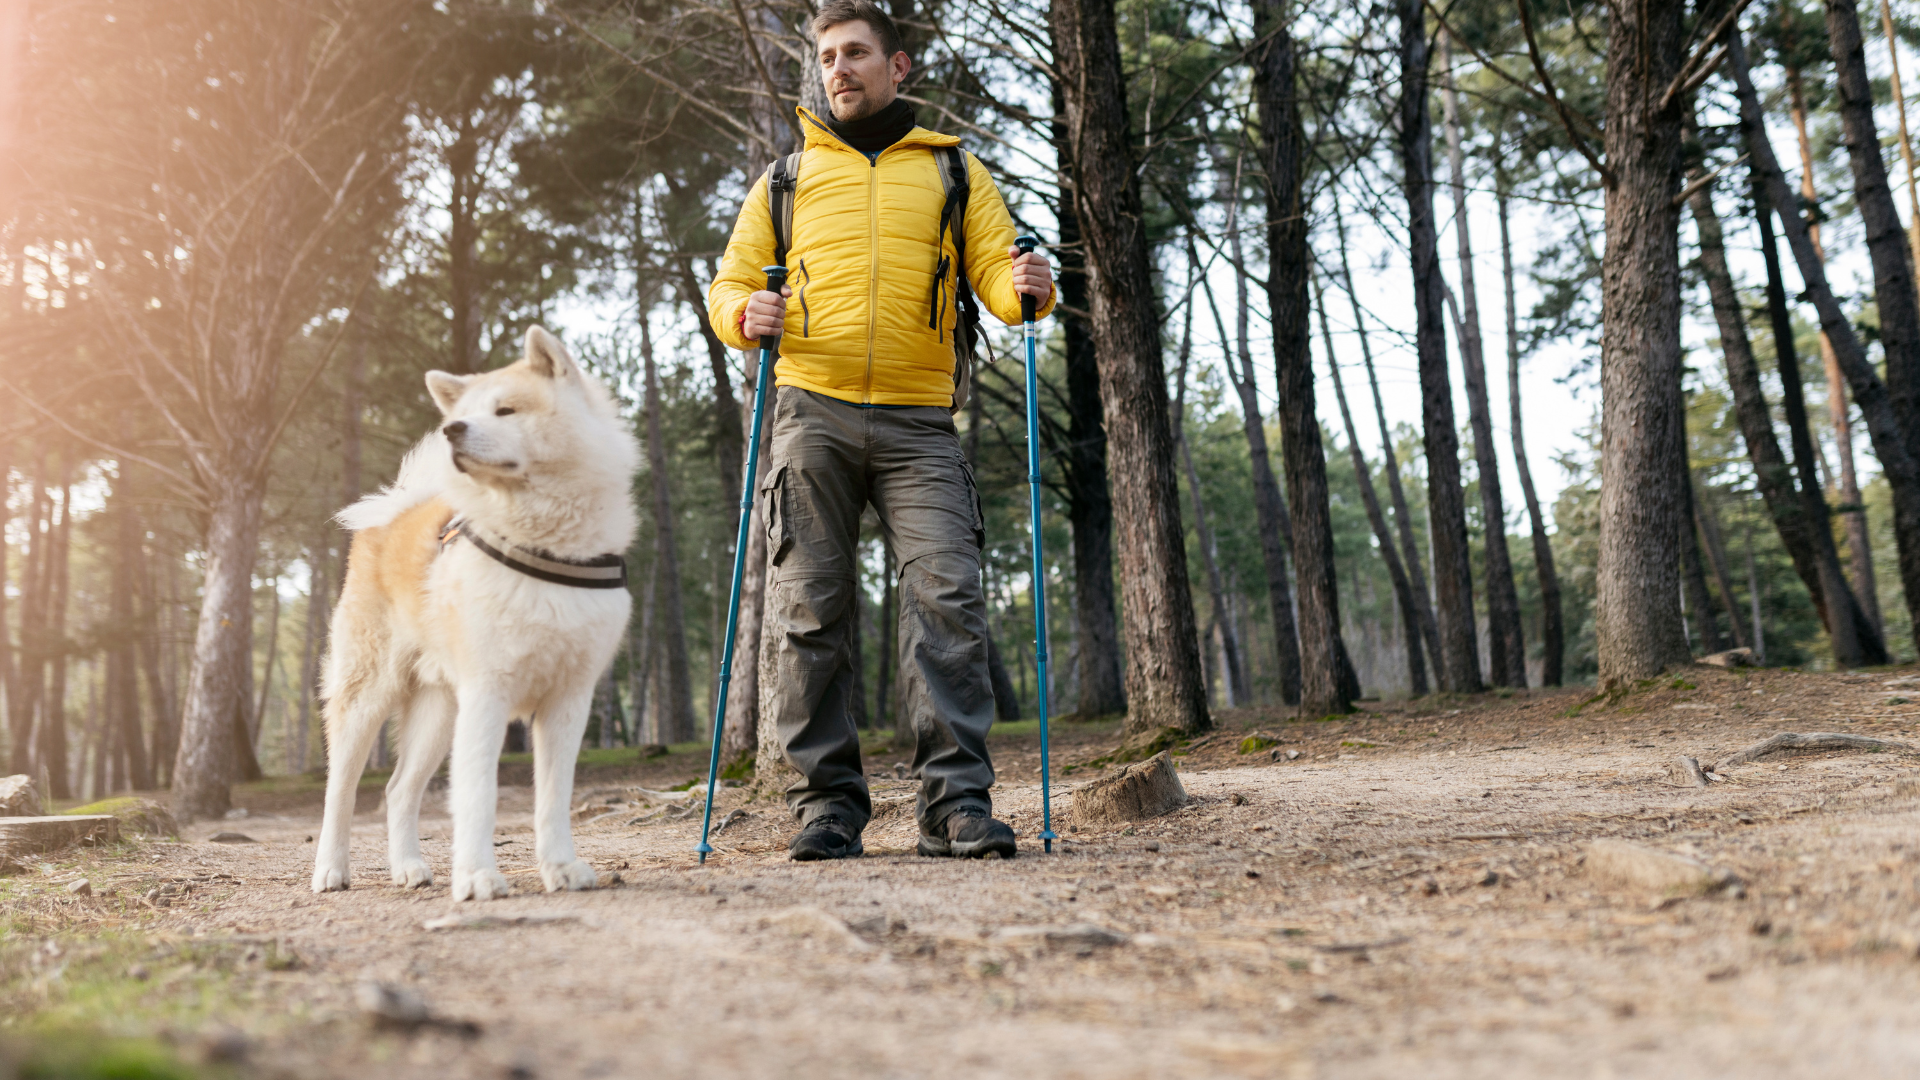 How to Read Dog Body Language on the Trail